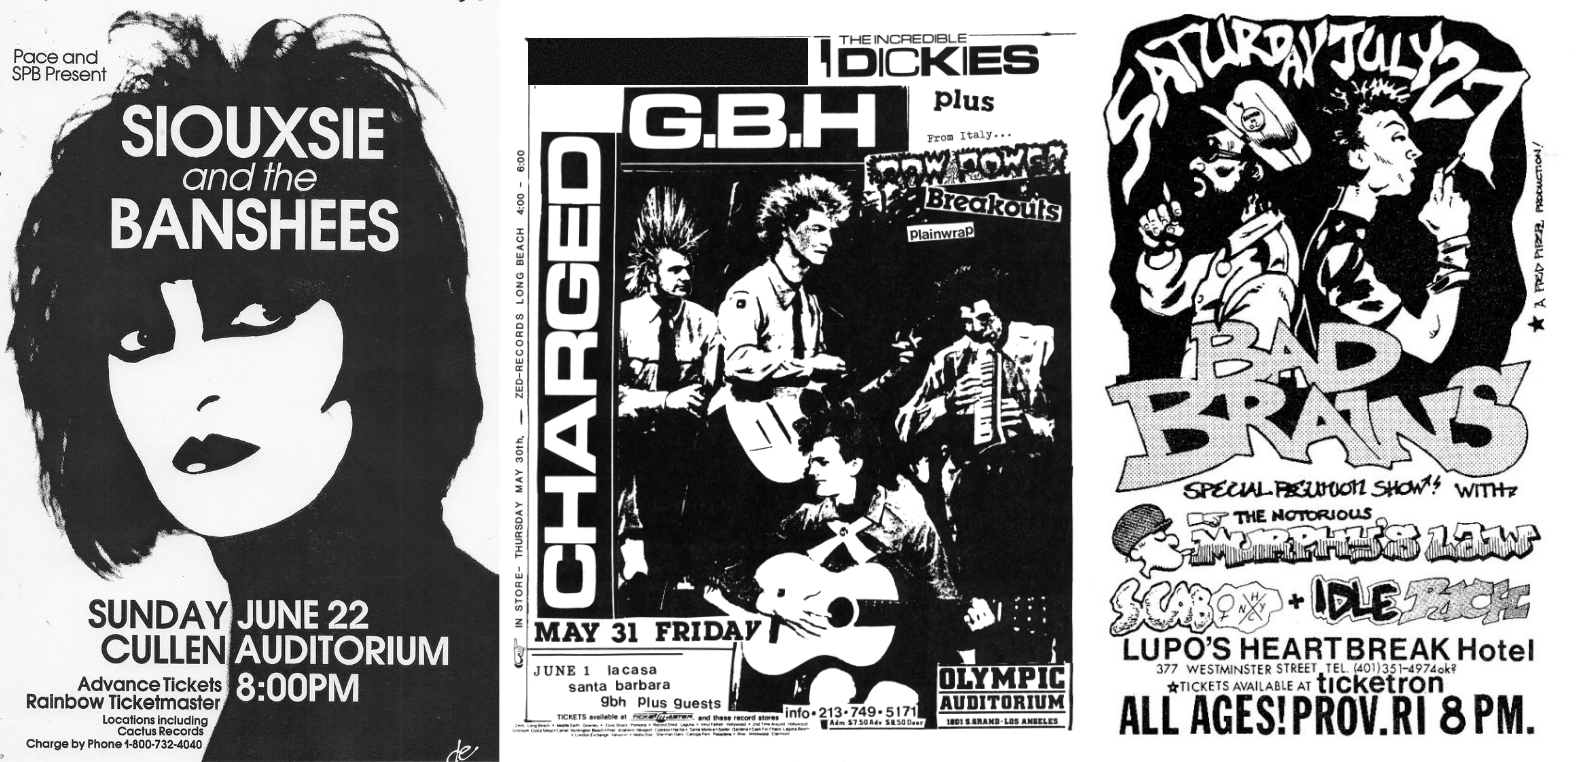 A collage of show posters for Siouxie and the Banshees, GBH, Bad Brains and more.